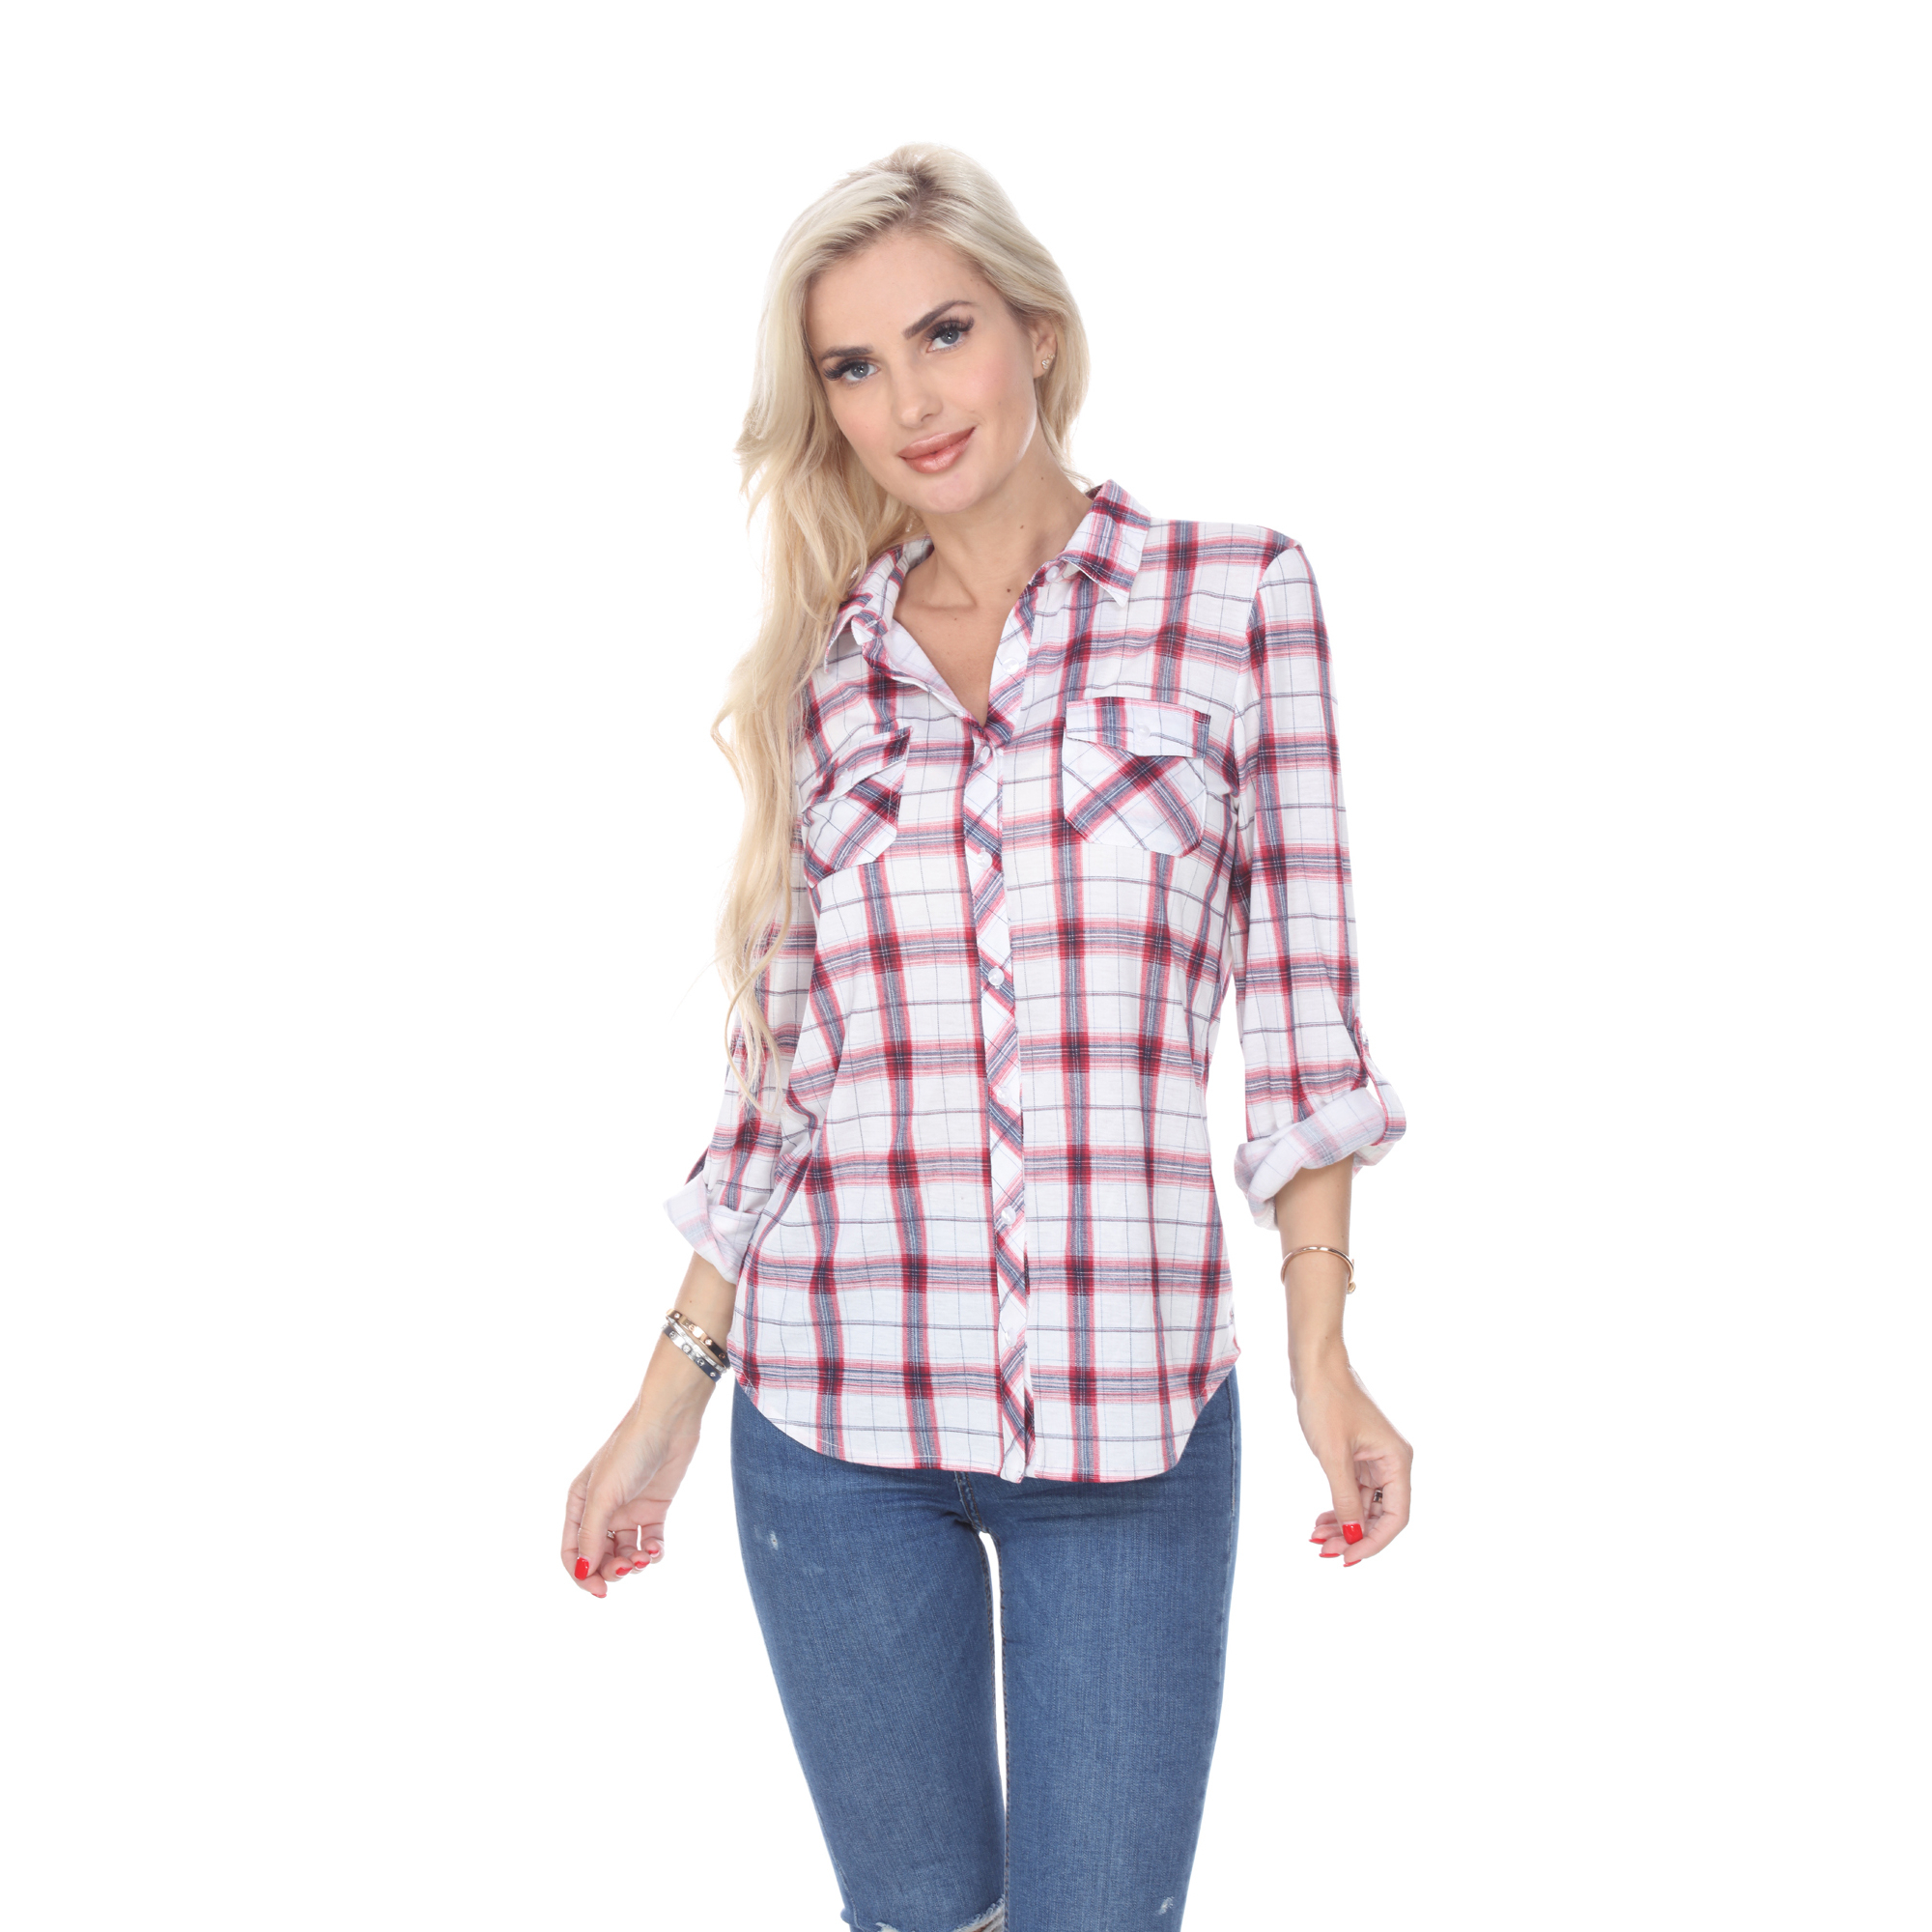 White Mark Women's Stretchy Plaid Flannel Shirt - Red/White, Small